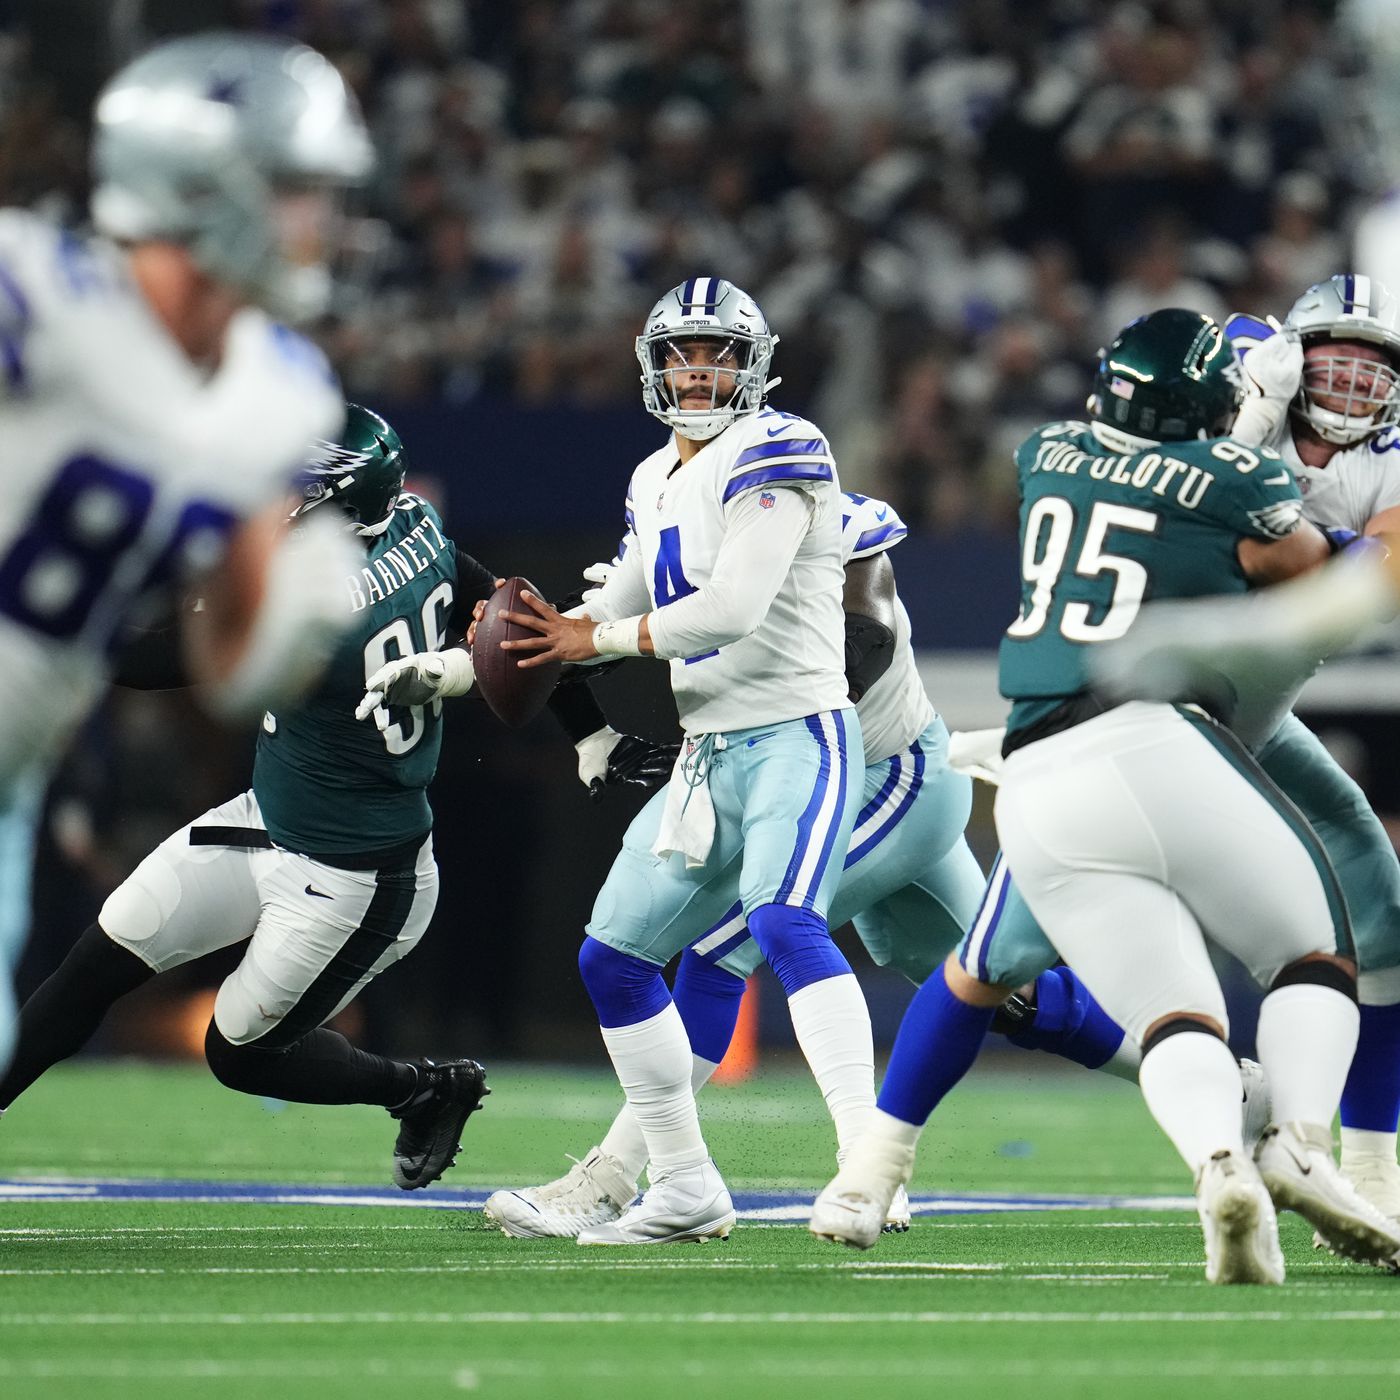 NFL Week 16 Saturday Schedule: Eagles and Cowboys battle with NFC East on  the line - Acme Packing Company